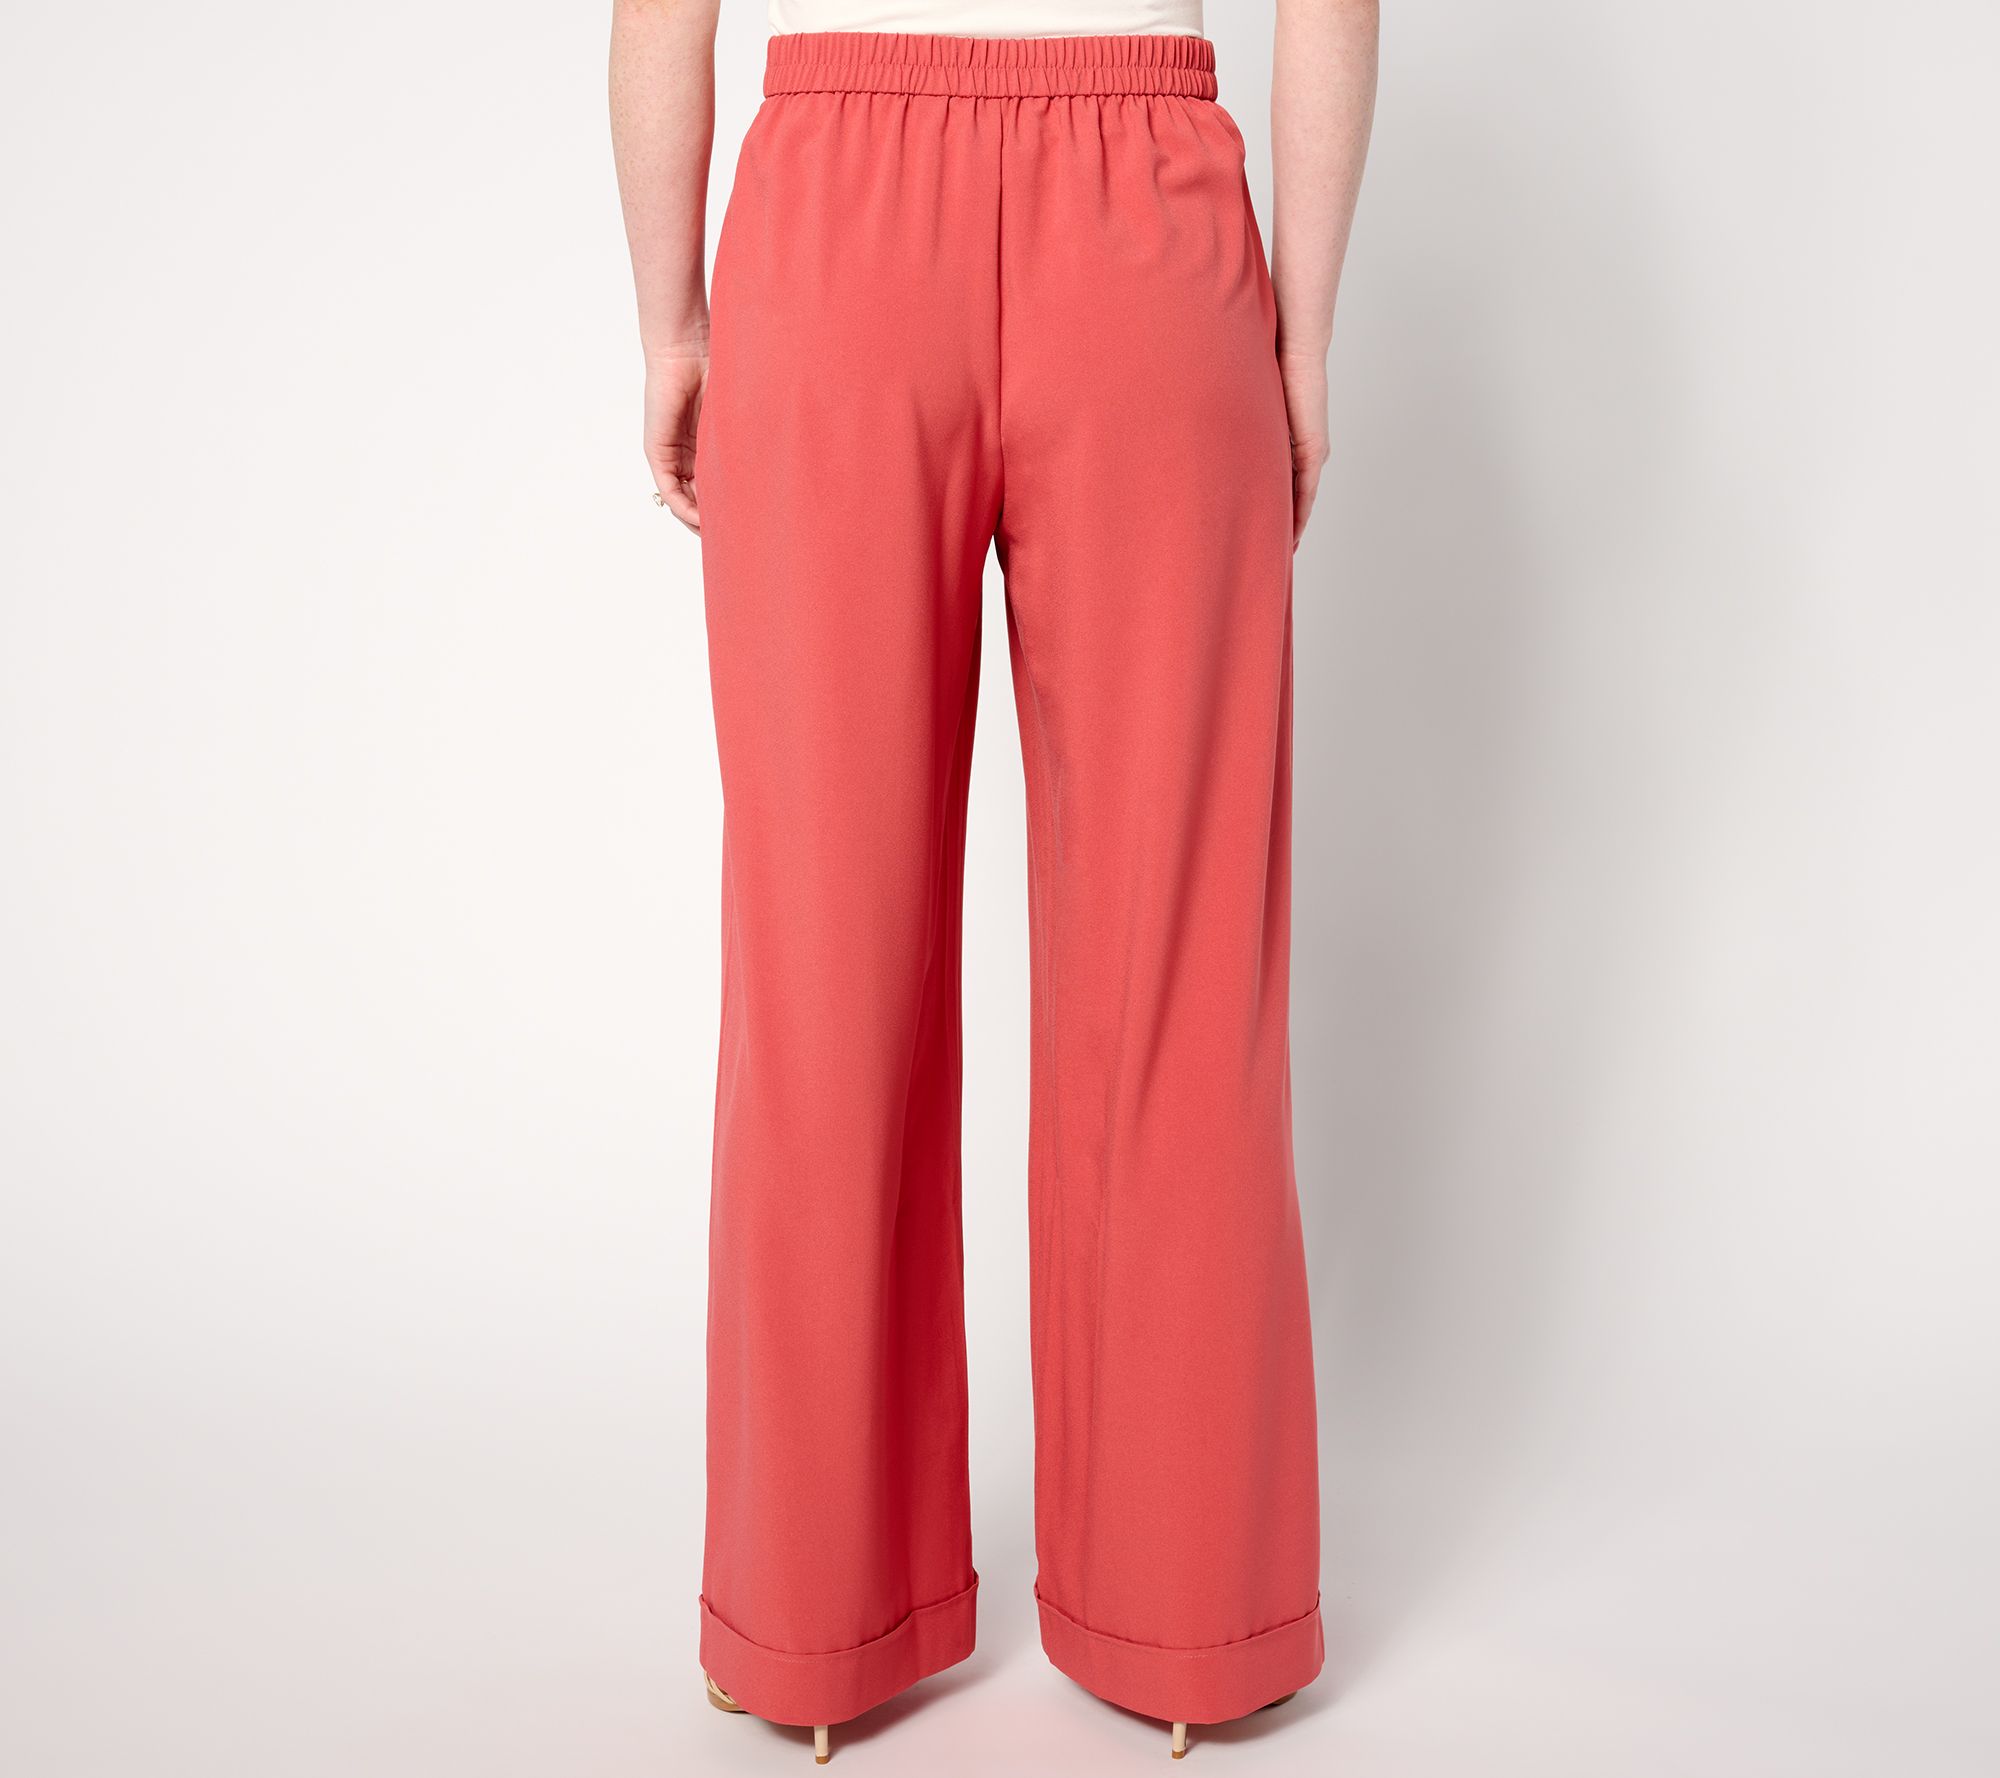 BEAUTIFUL by Lawrence Zarian Regular Pull-On Wide Leg Pant 